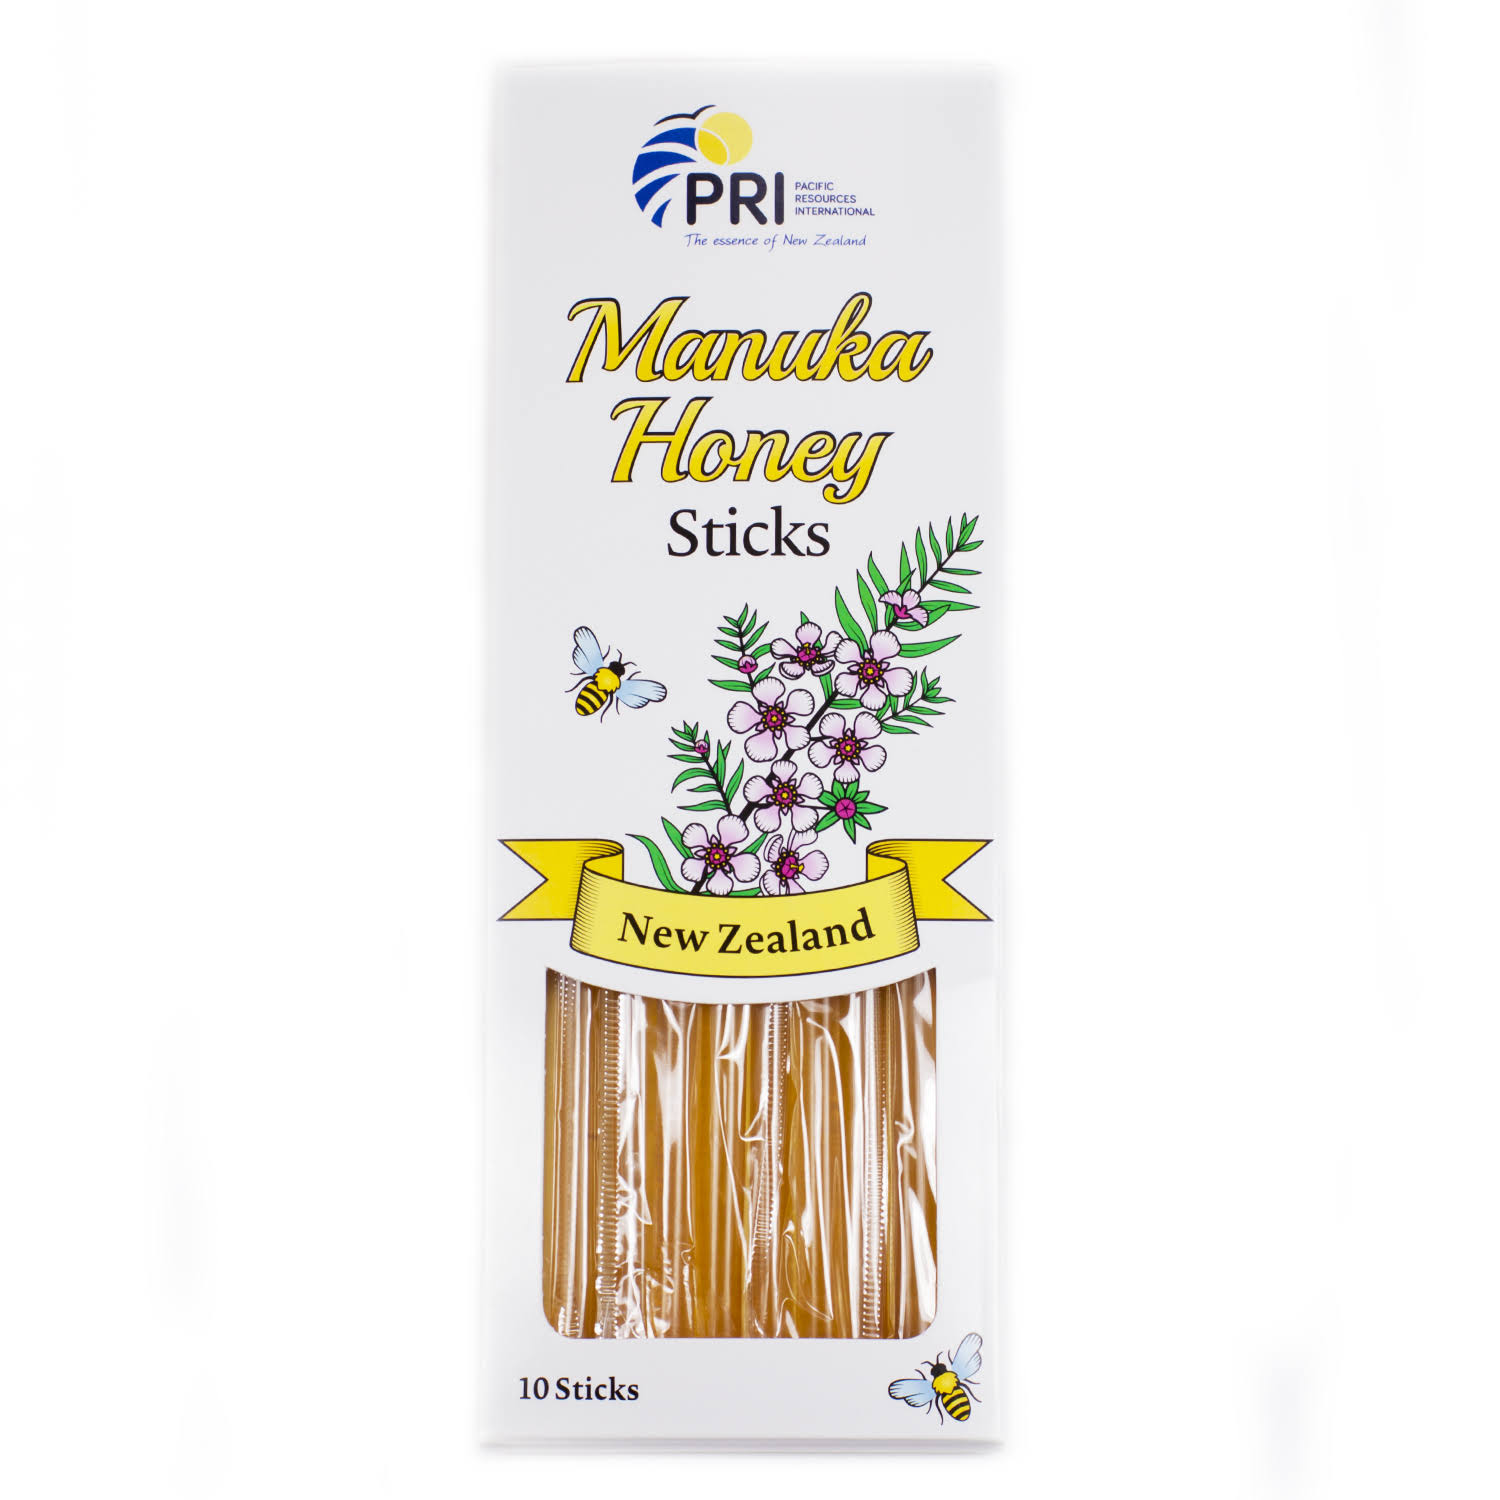 Pacific Resources International Manuka Honey Sticks, 10 Count (Pack of 1)